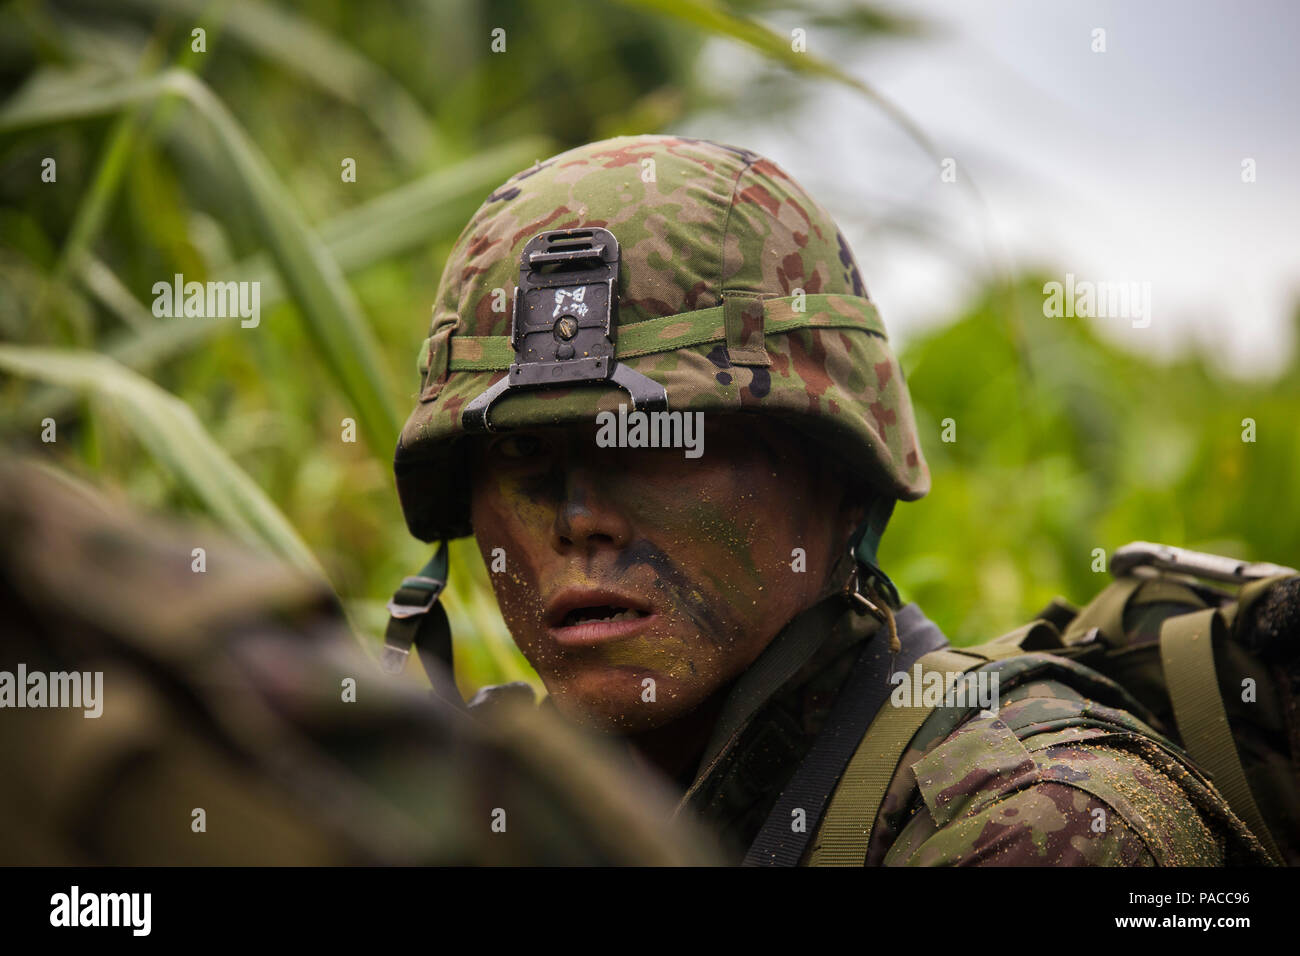 A Japan Ground Self-Defense Force member provides security Mar. 11, at Kin  Blue, Okinawa, Japan. The JGSDF observed U.S. Marines with 3rd  Reconnaissance Battalion, 3rd Marine Division, III Marine Expeditionary  Force, conducting